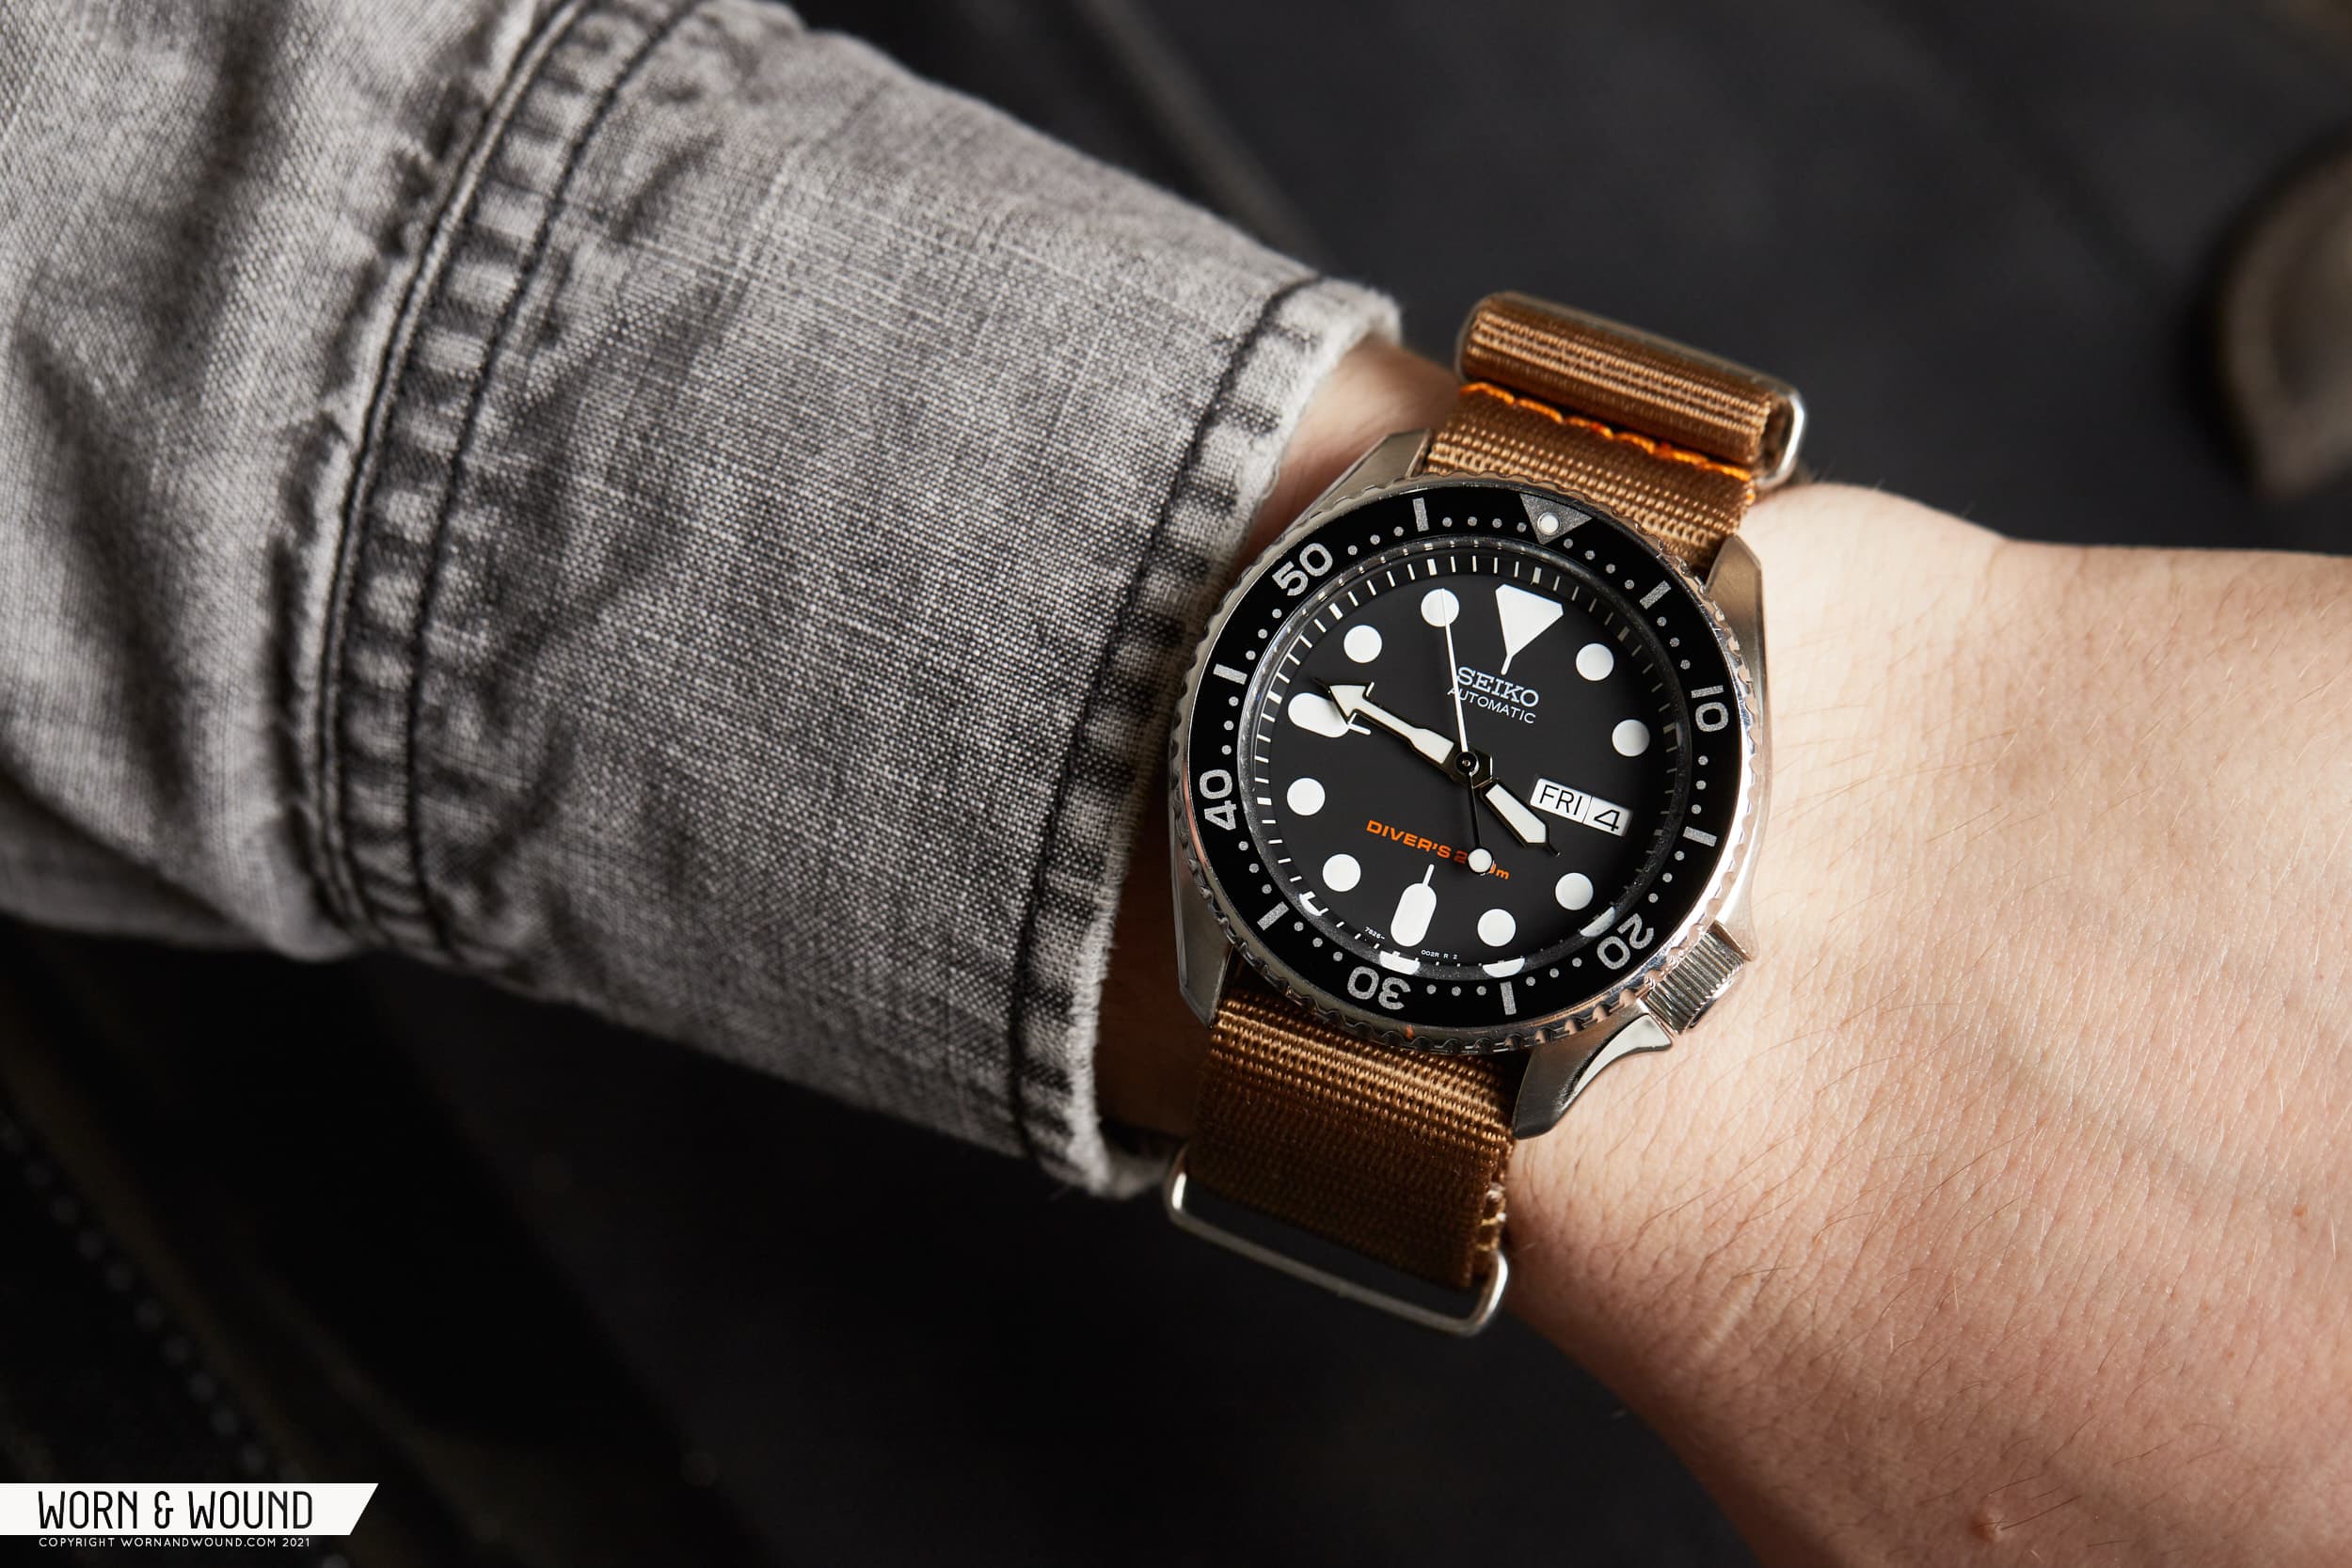 10 Years Later: Seiko SKX007 As Seen By The W&W Editors - Worn Wound